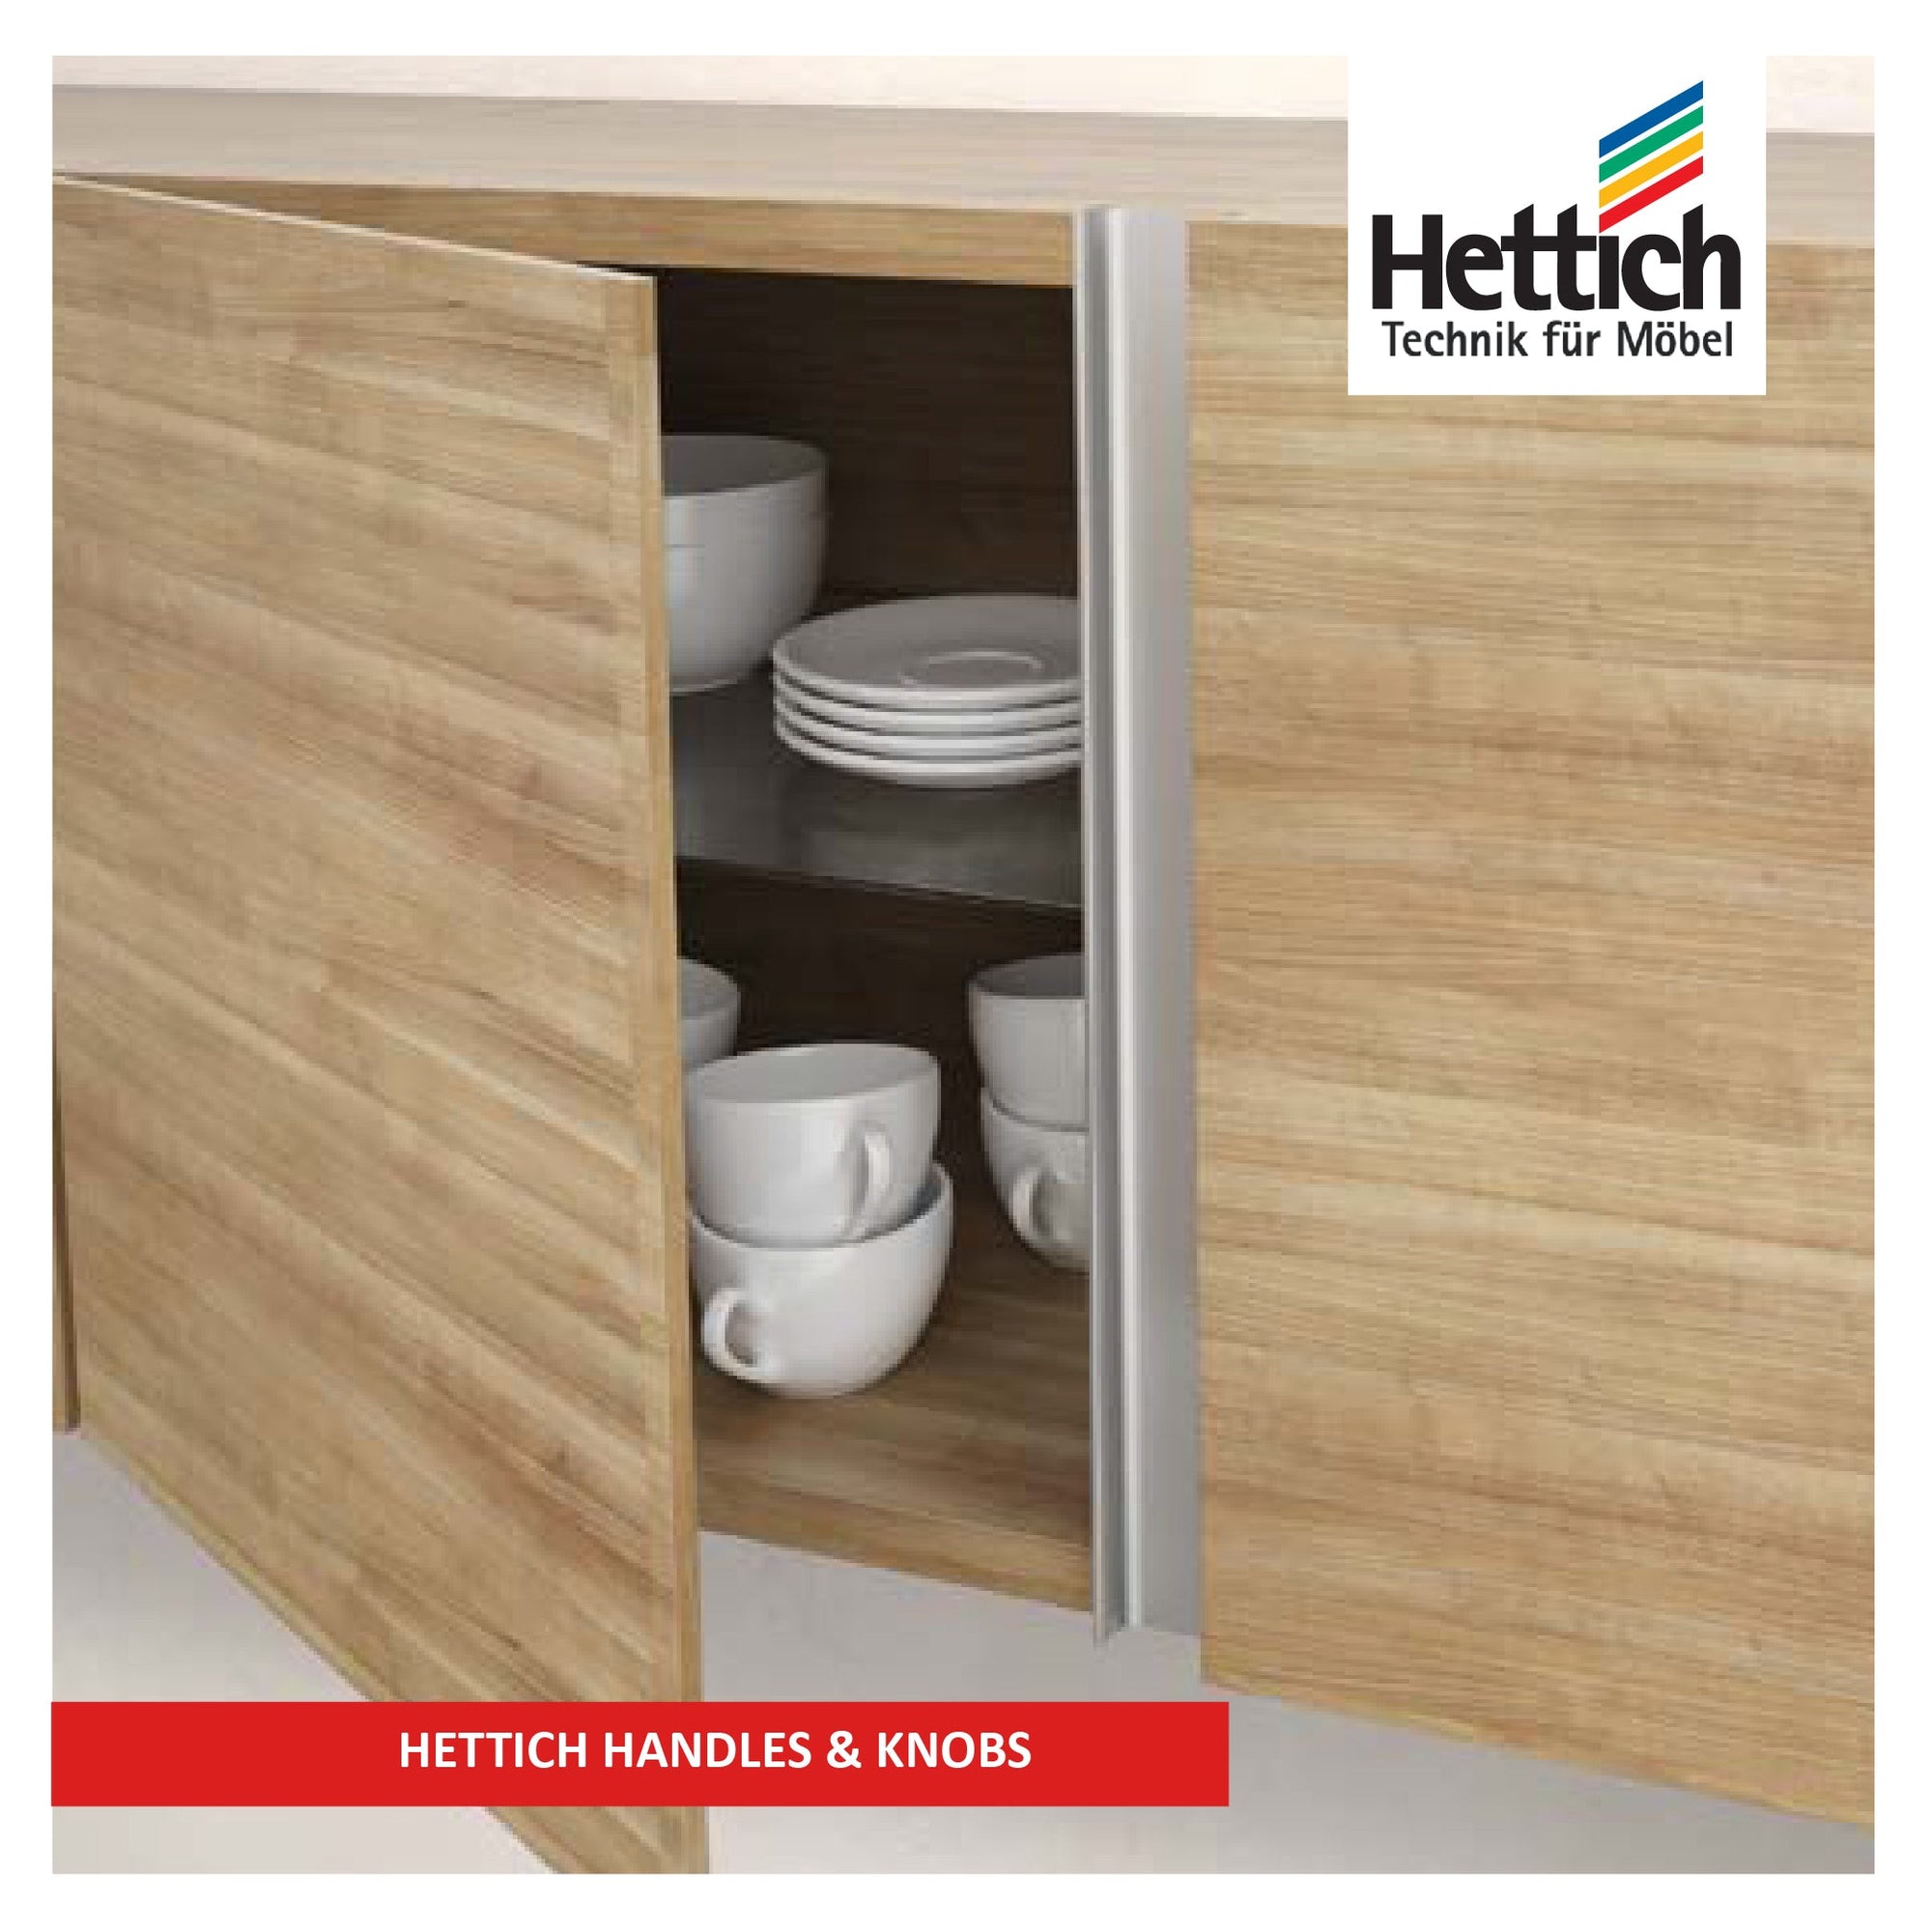 Premium Hettich Handles & Knobs by M. M. Noorbhoy & Co - High-quality hardware solutions for cabinets and furniture.